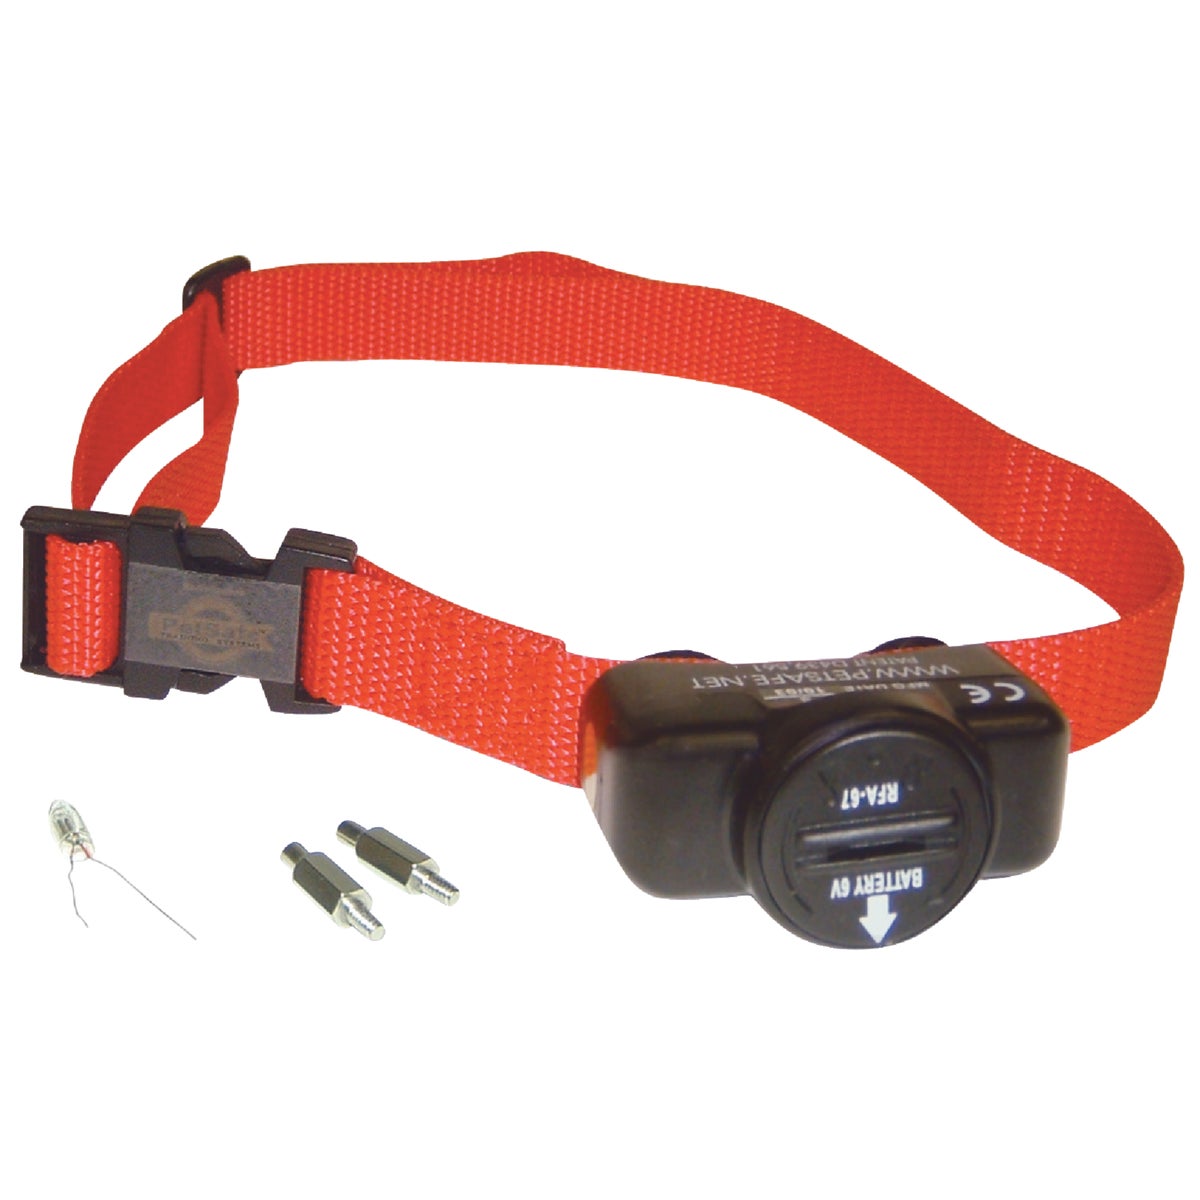 PetSafe Ultralight Fence Receiver Collar For Dogs Over 8 Lb.